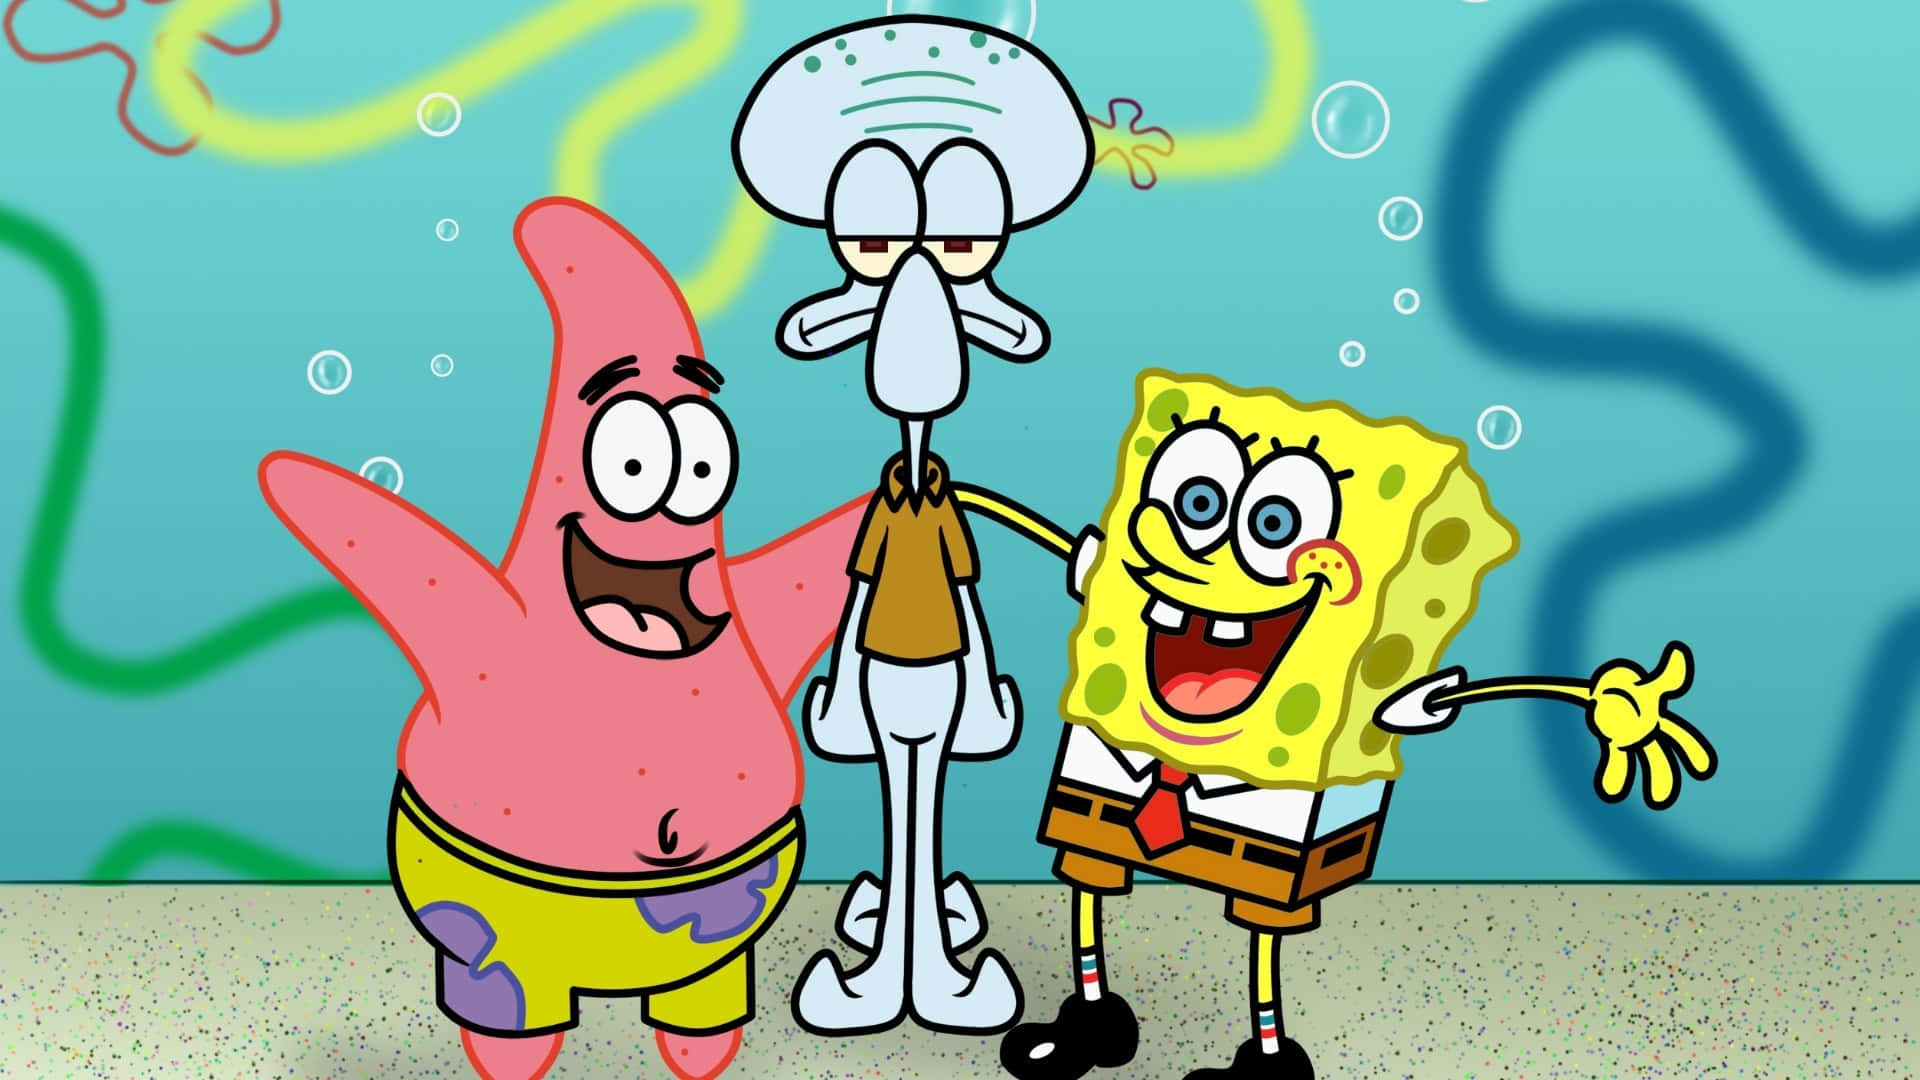 Join Spongebob and Friends on a Fun Adventure!